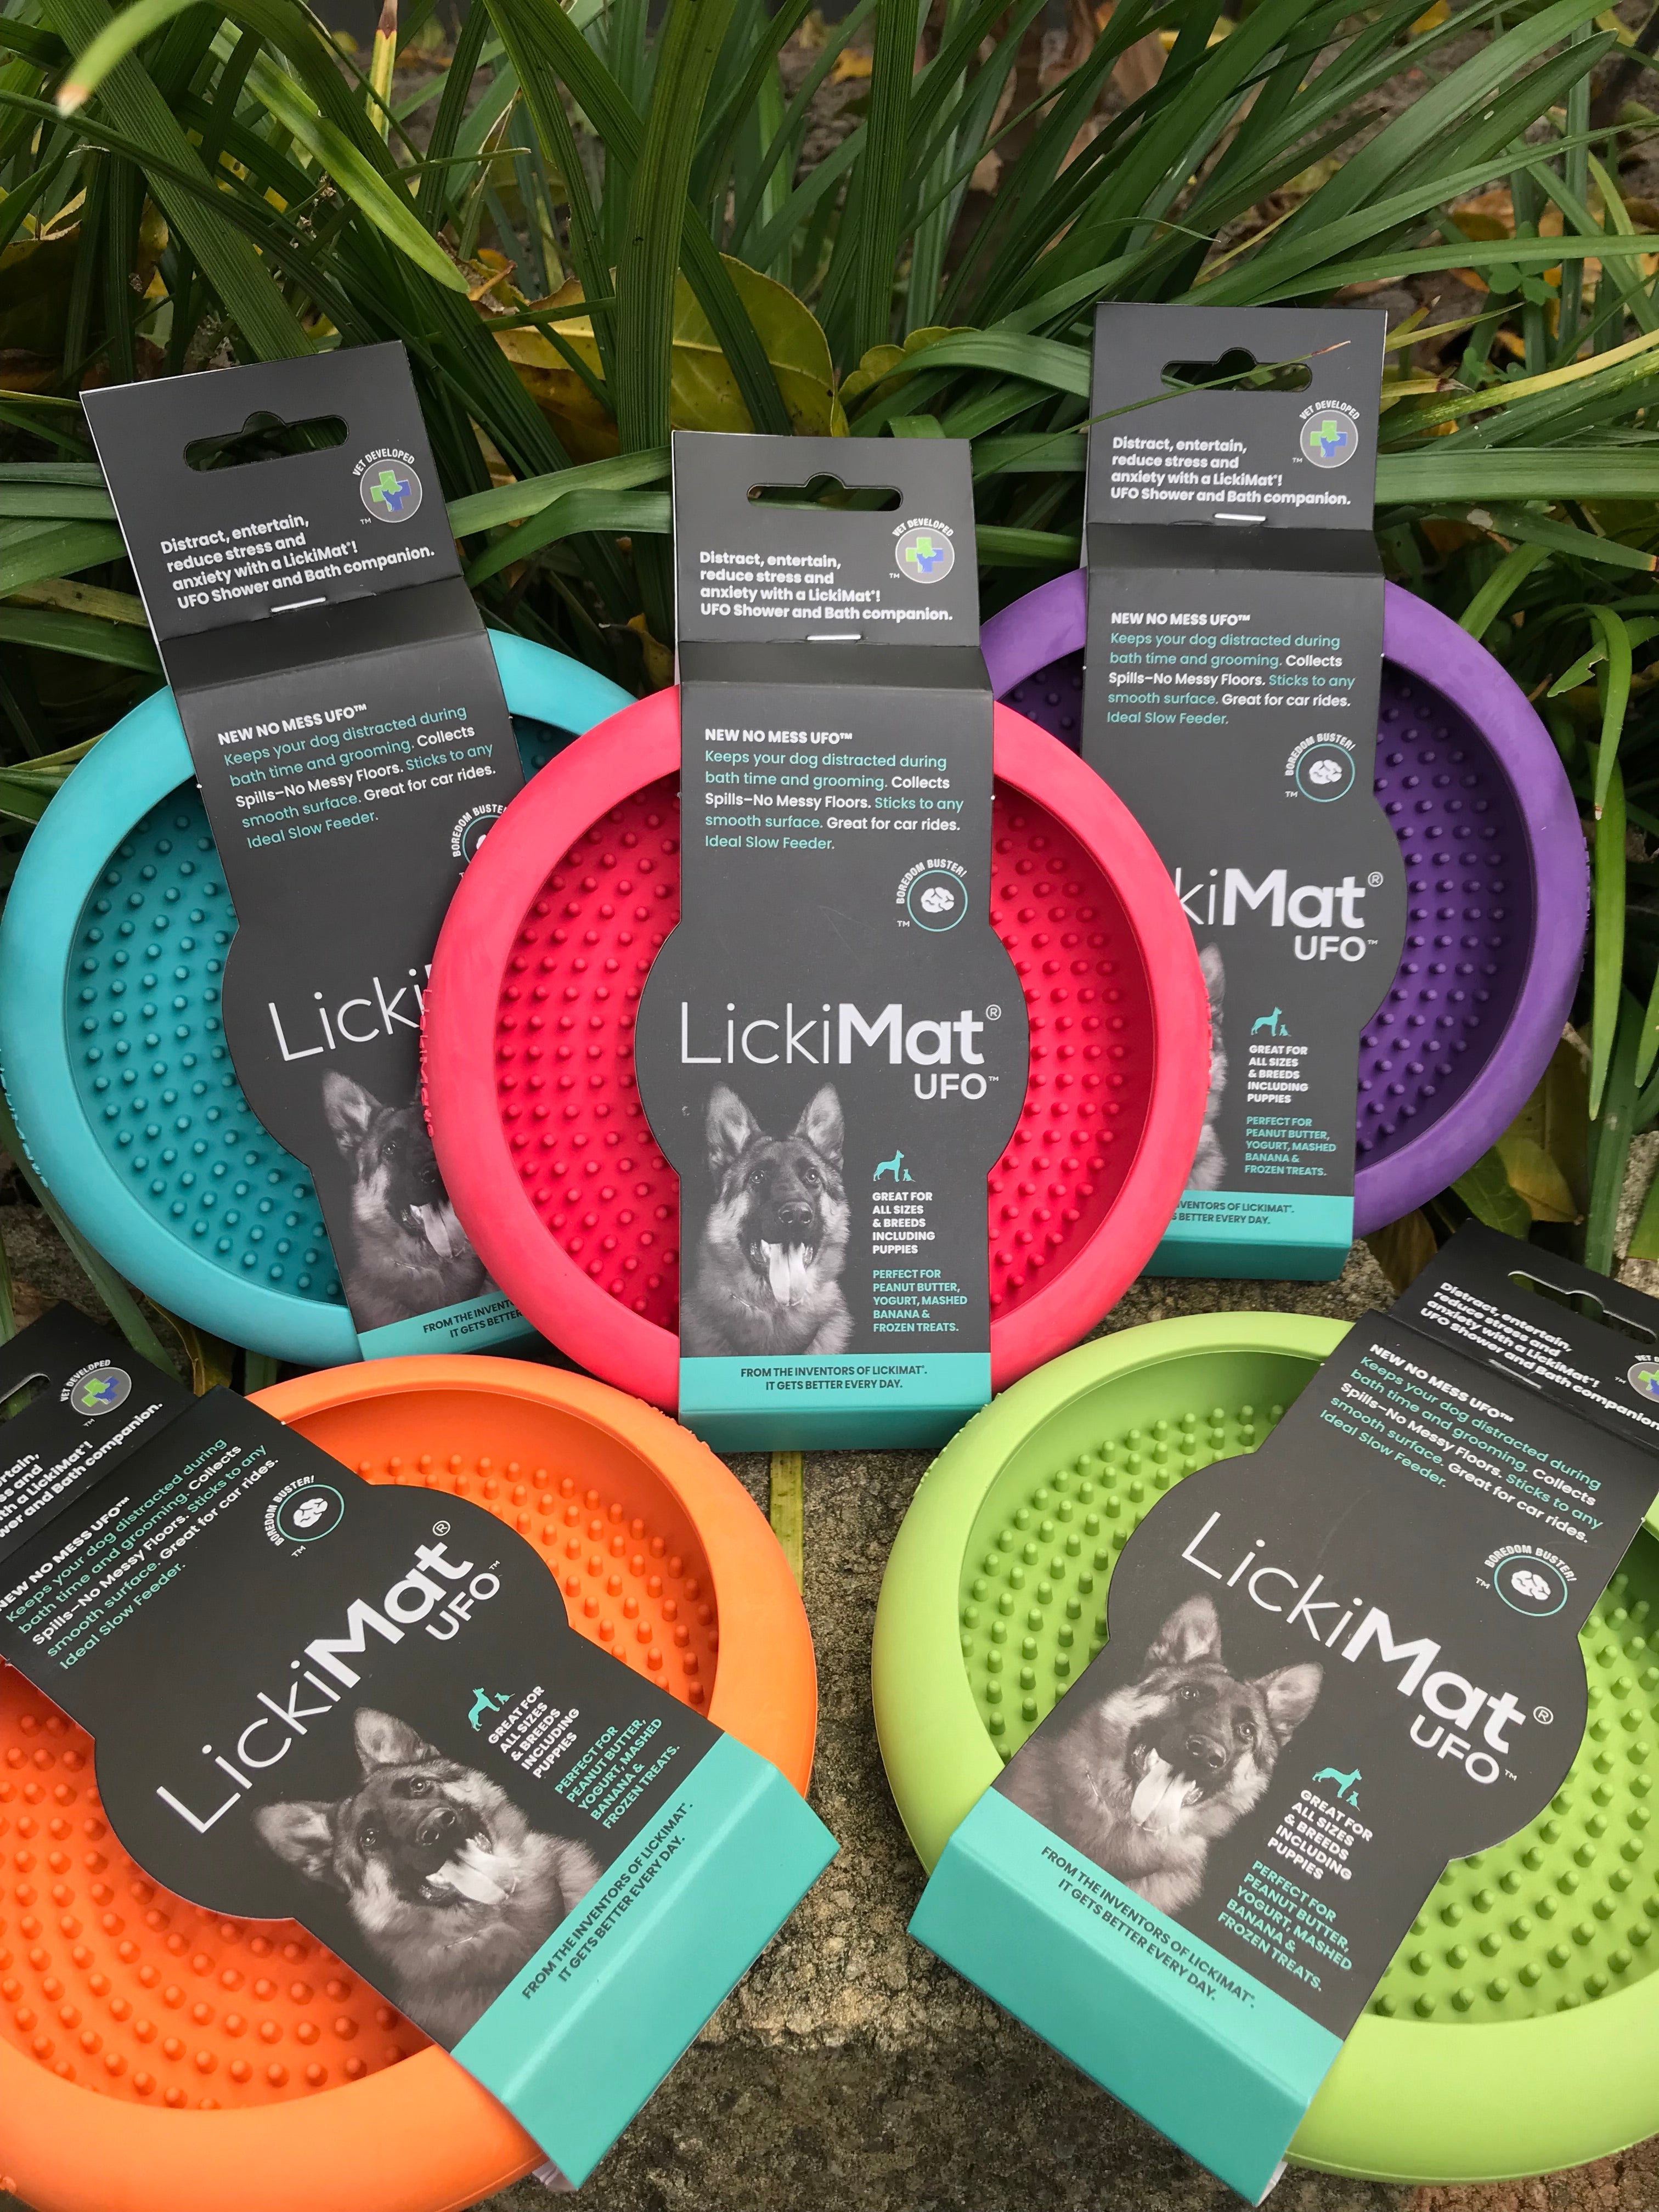 LickiMat® Soother™ XL – The Woof Club